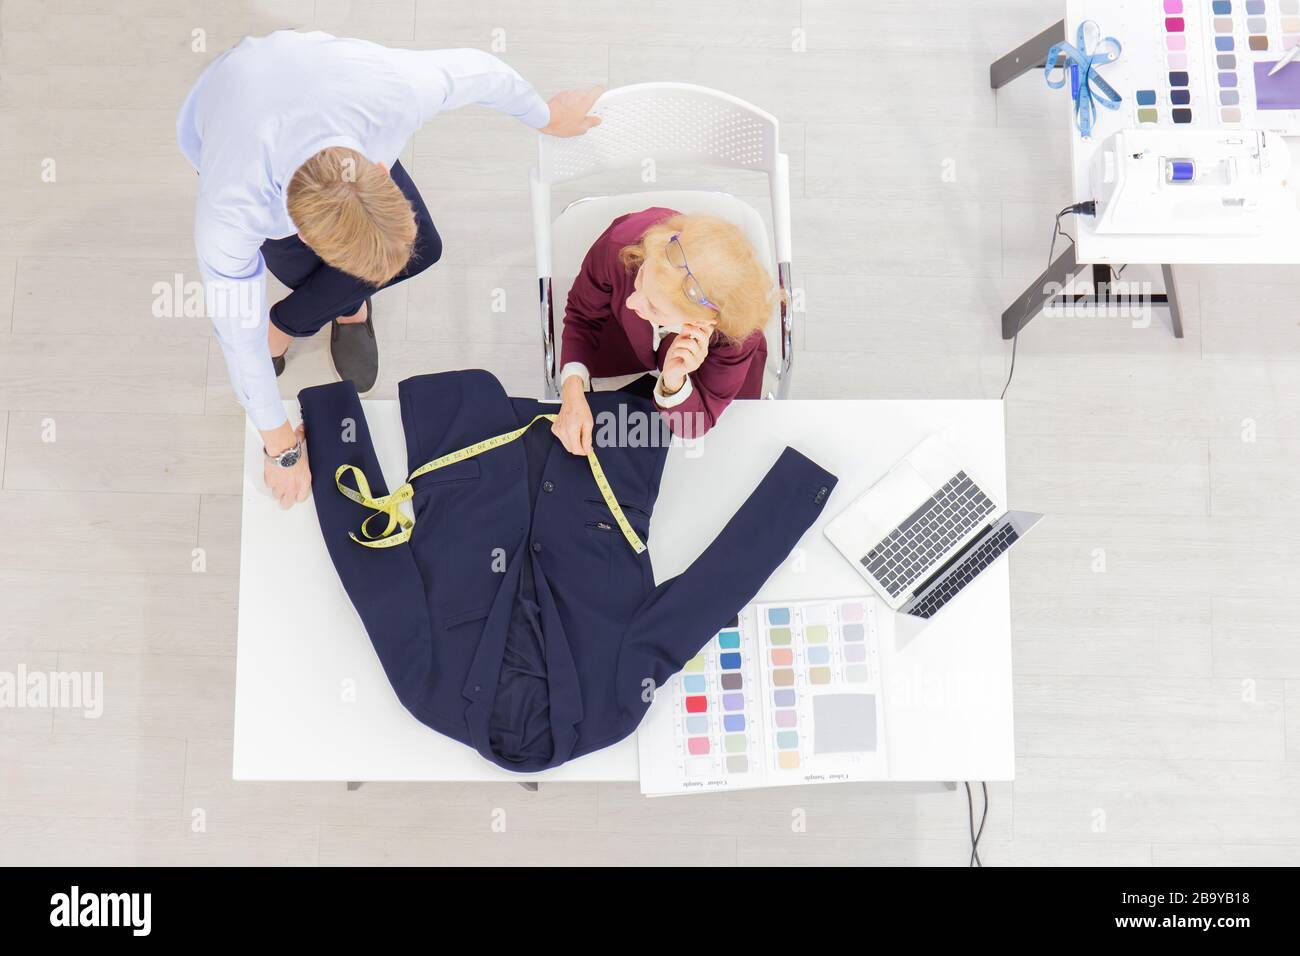 Topview Professional team work designers, young men and elderly women in the office with a variety of fabric tones and equipment for various designs. Stock Photo